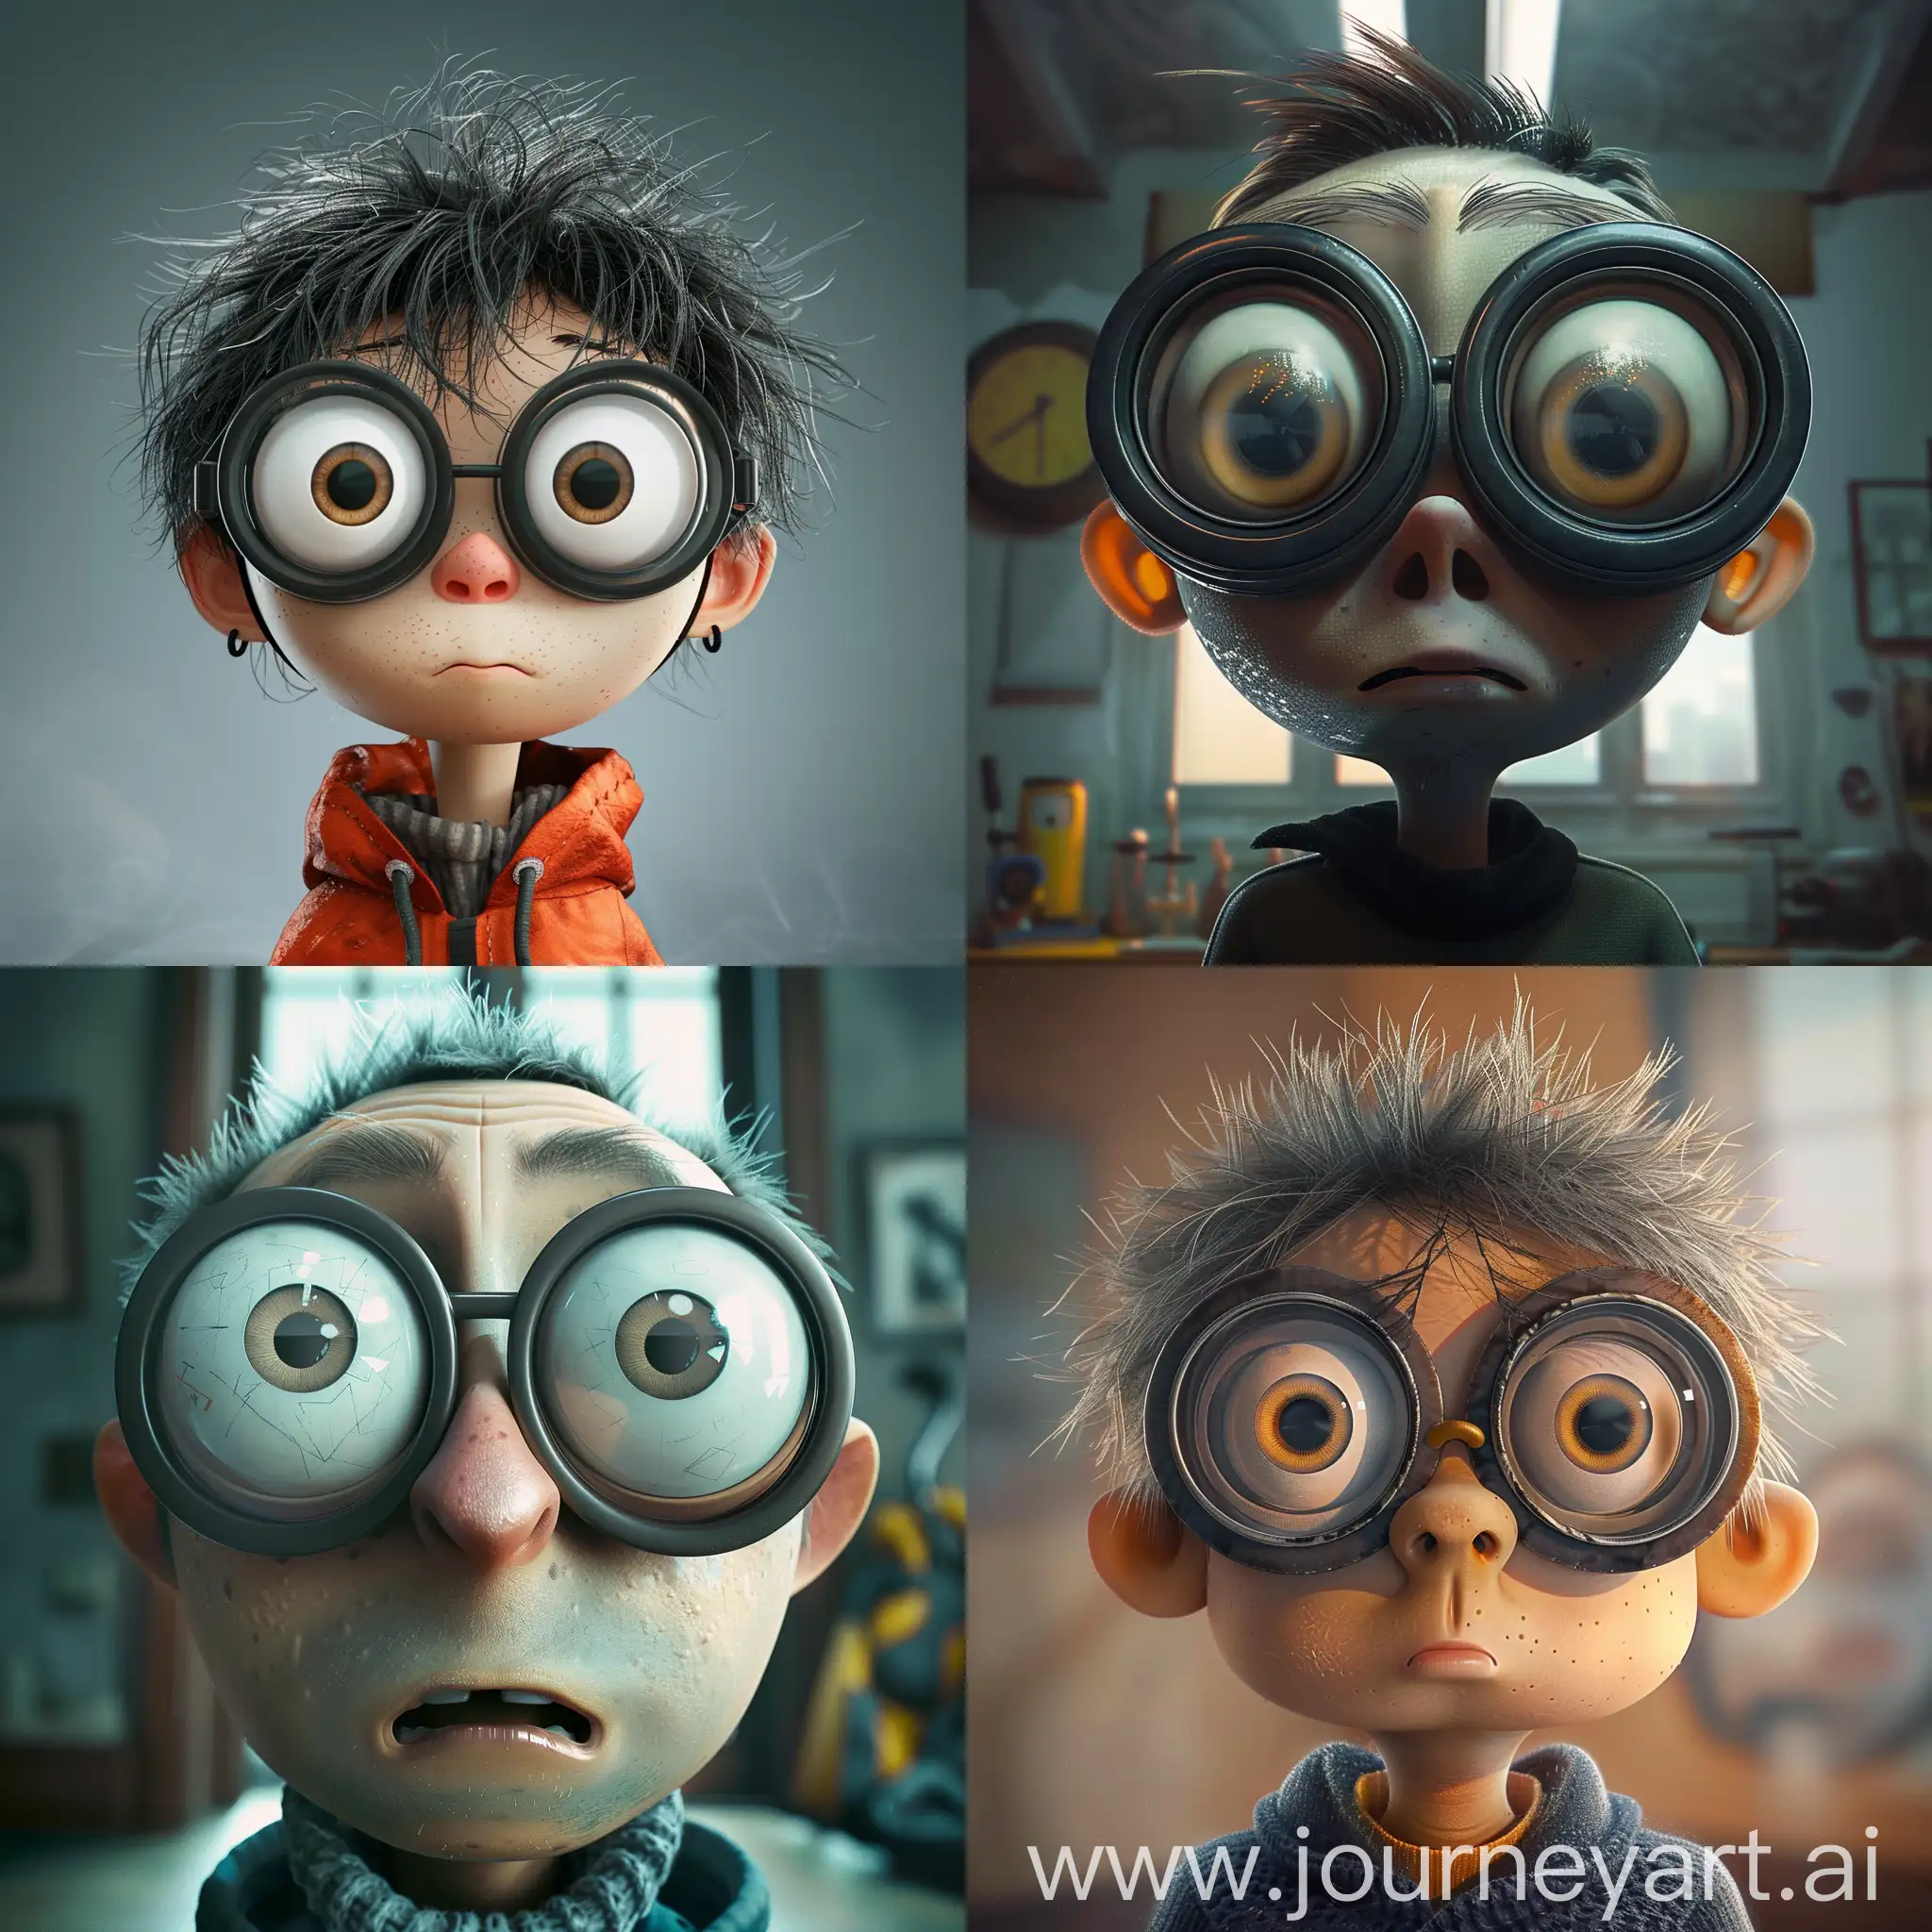 A crazy programmer with big eyes and huge round glasses. pixar style